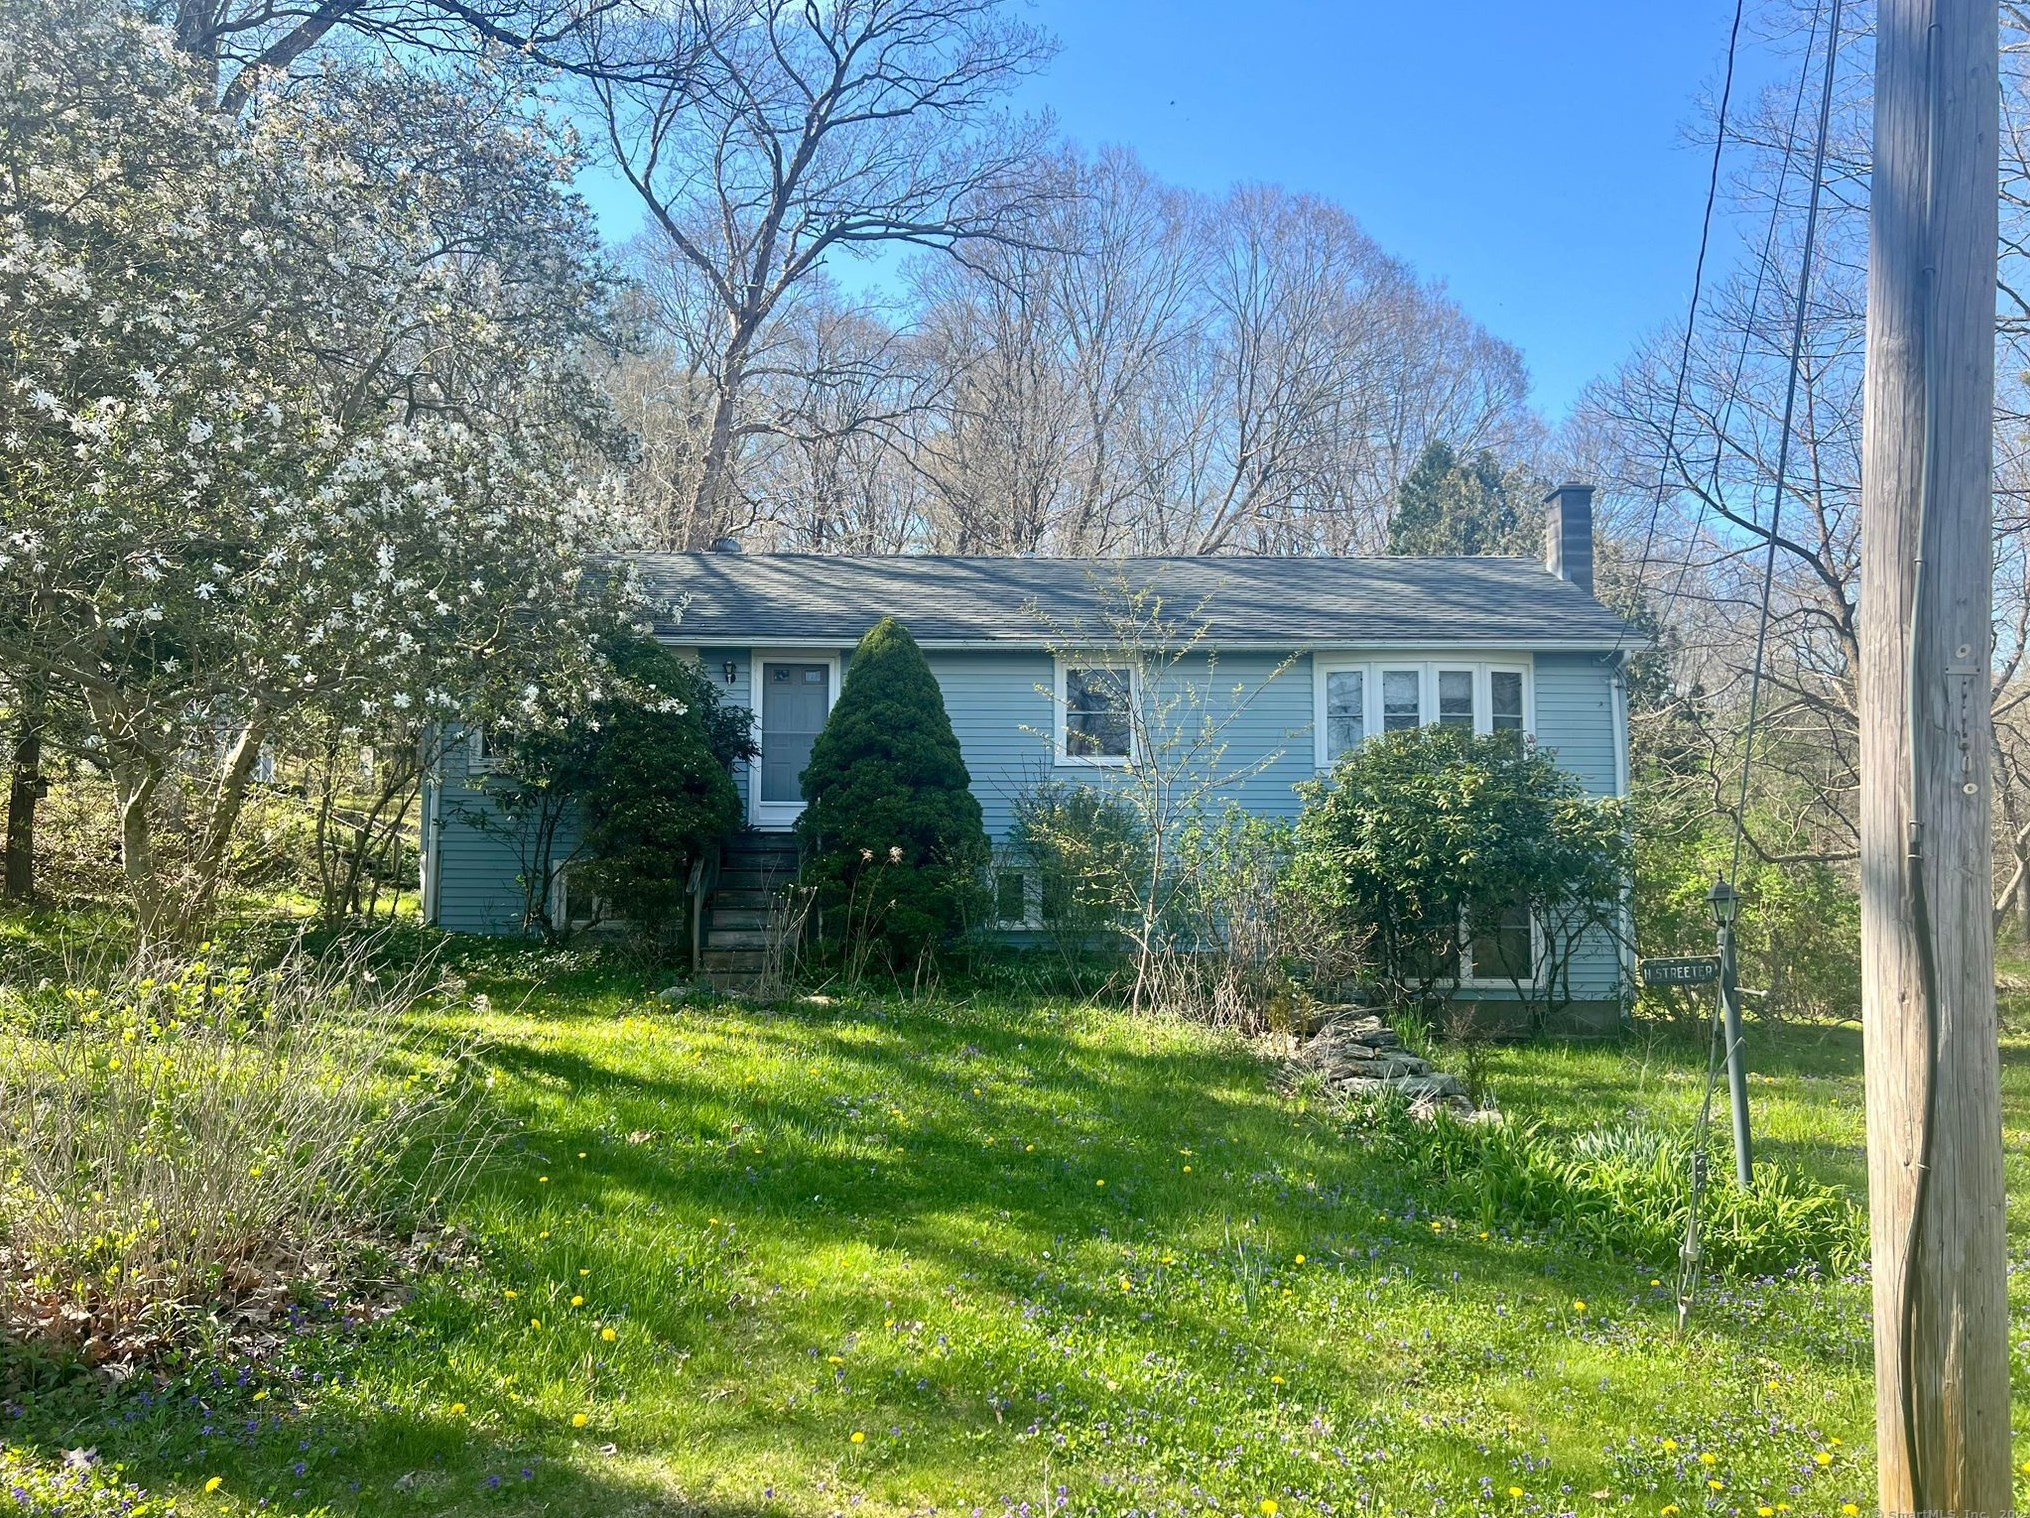 41 Tinkerville Rd, W Willington, CT 06279